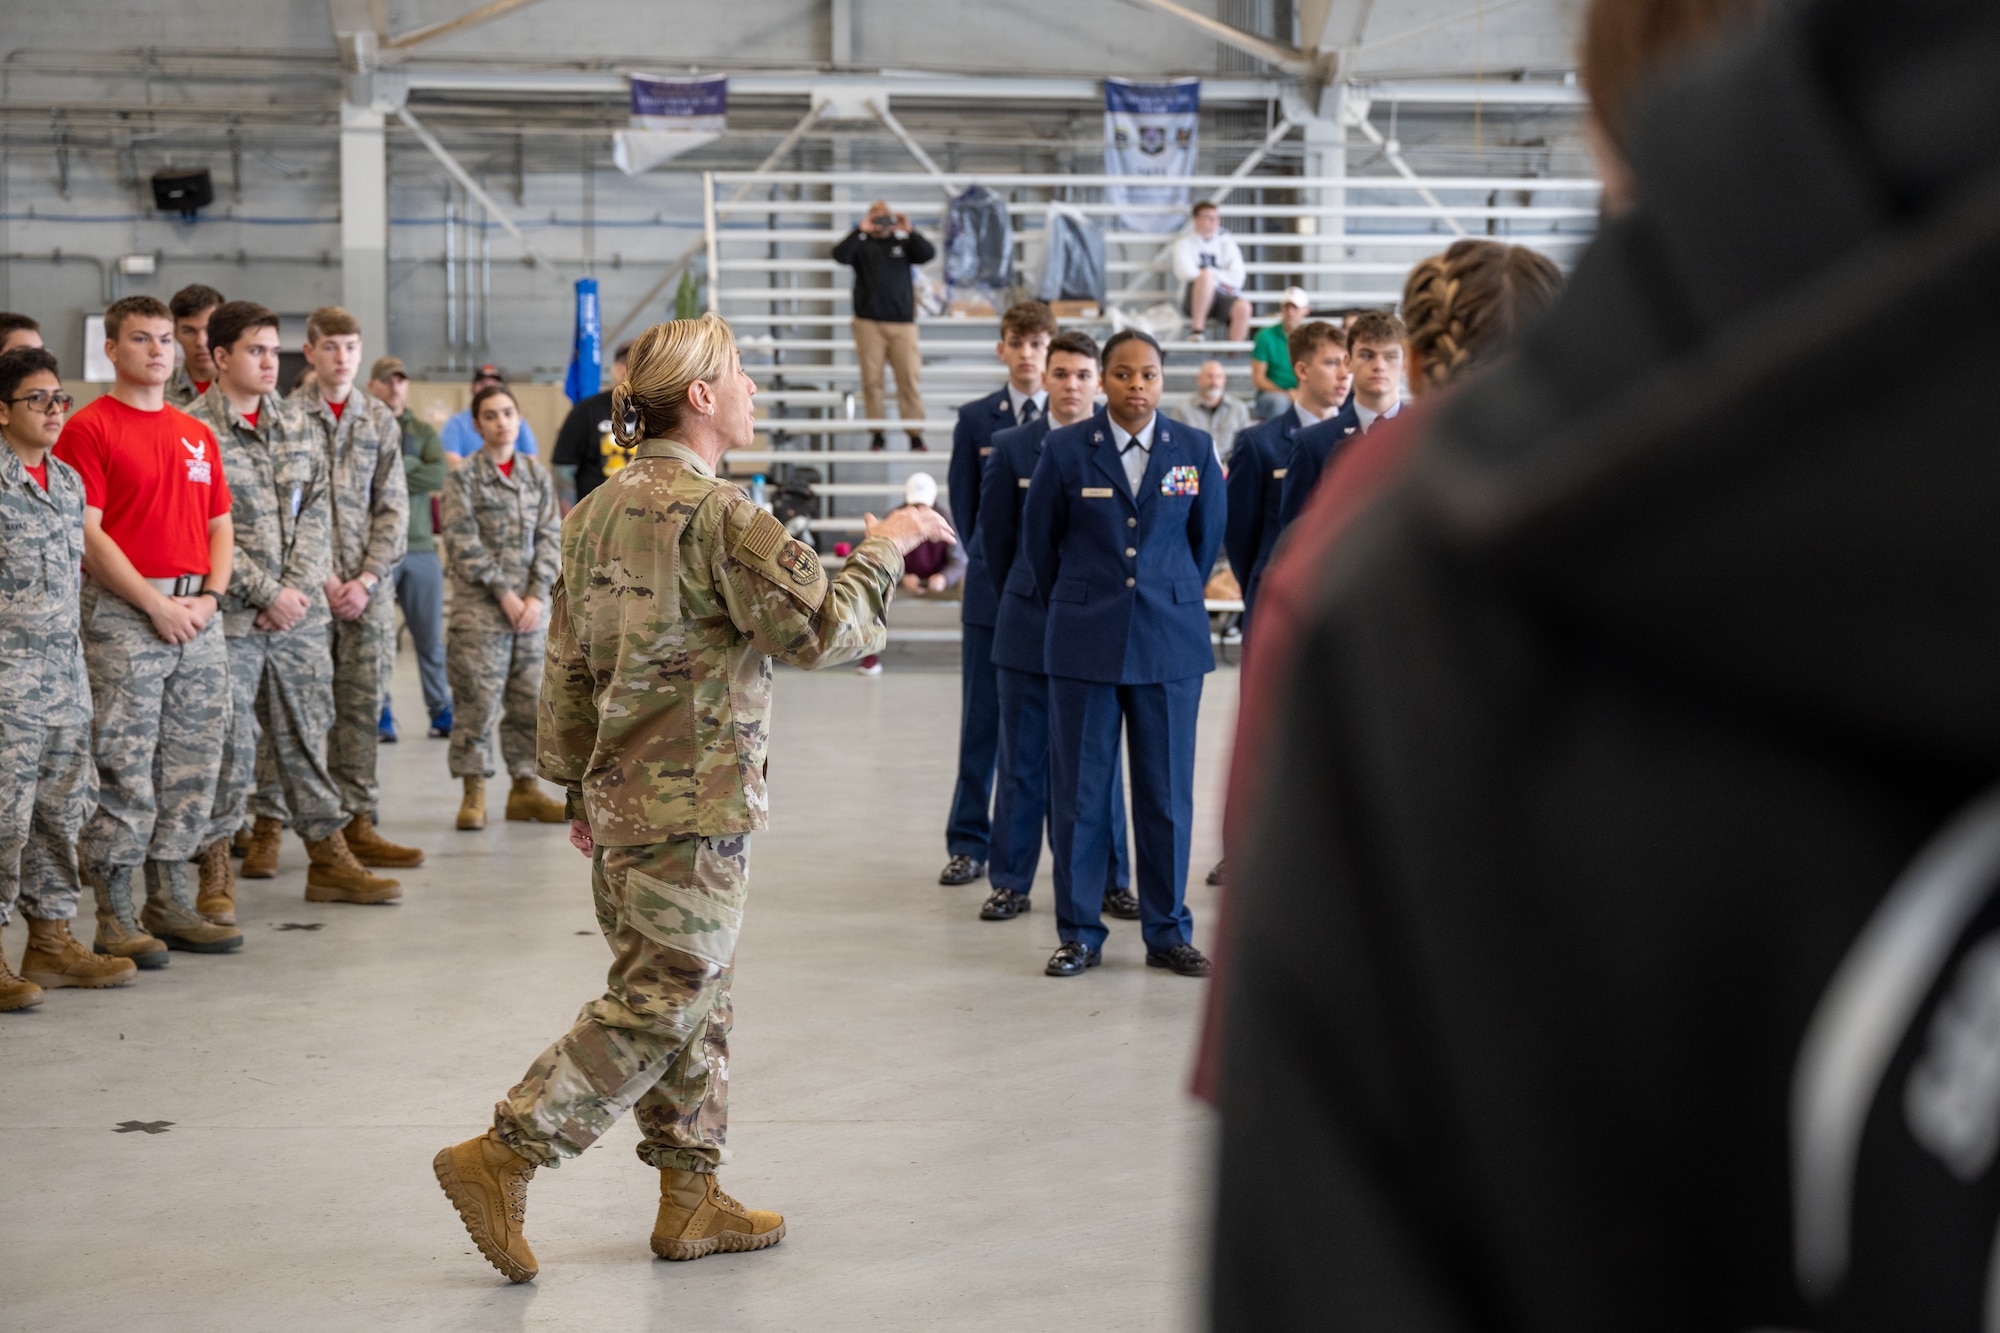 U.S. Air Force Col. Allison Black, 1st Special Operations Wing Commander, gives opening remarks during the Air Force Junior ROTC drill competition at the Commando Hanger at Hurlburt Field, Florida, Feb. 10, 2024. Team Hurlburt is committed to fostering key relationships in order to bolster community bonds by organizing events such as the drill competition. (U.S. Air Force photo by Senior Airman Alysa Calvarese)